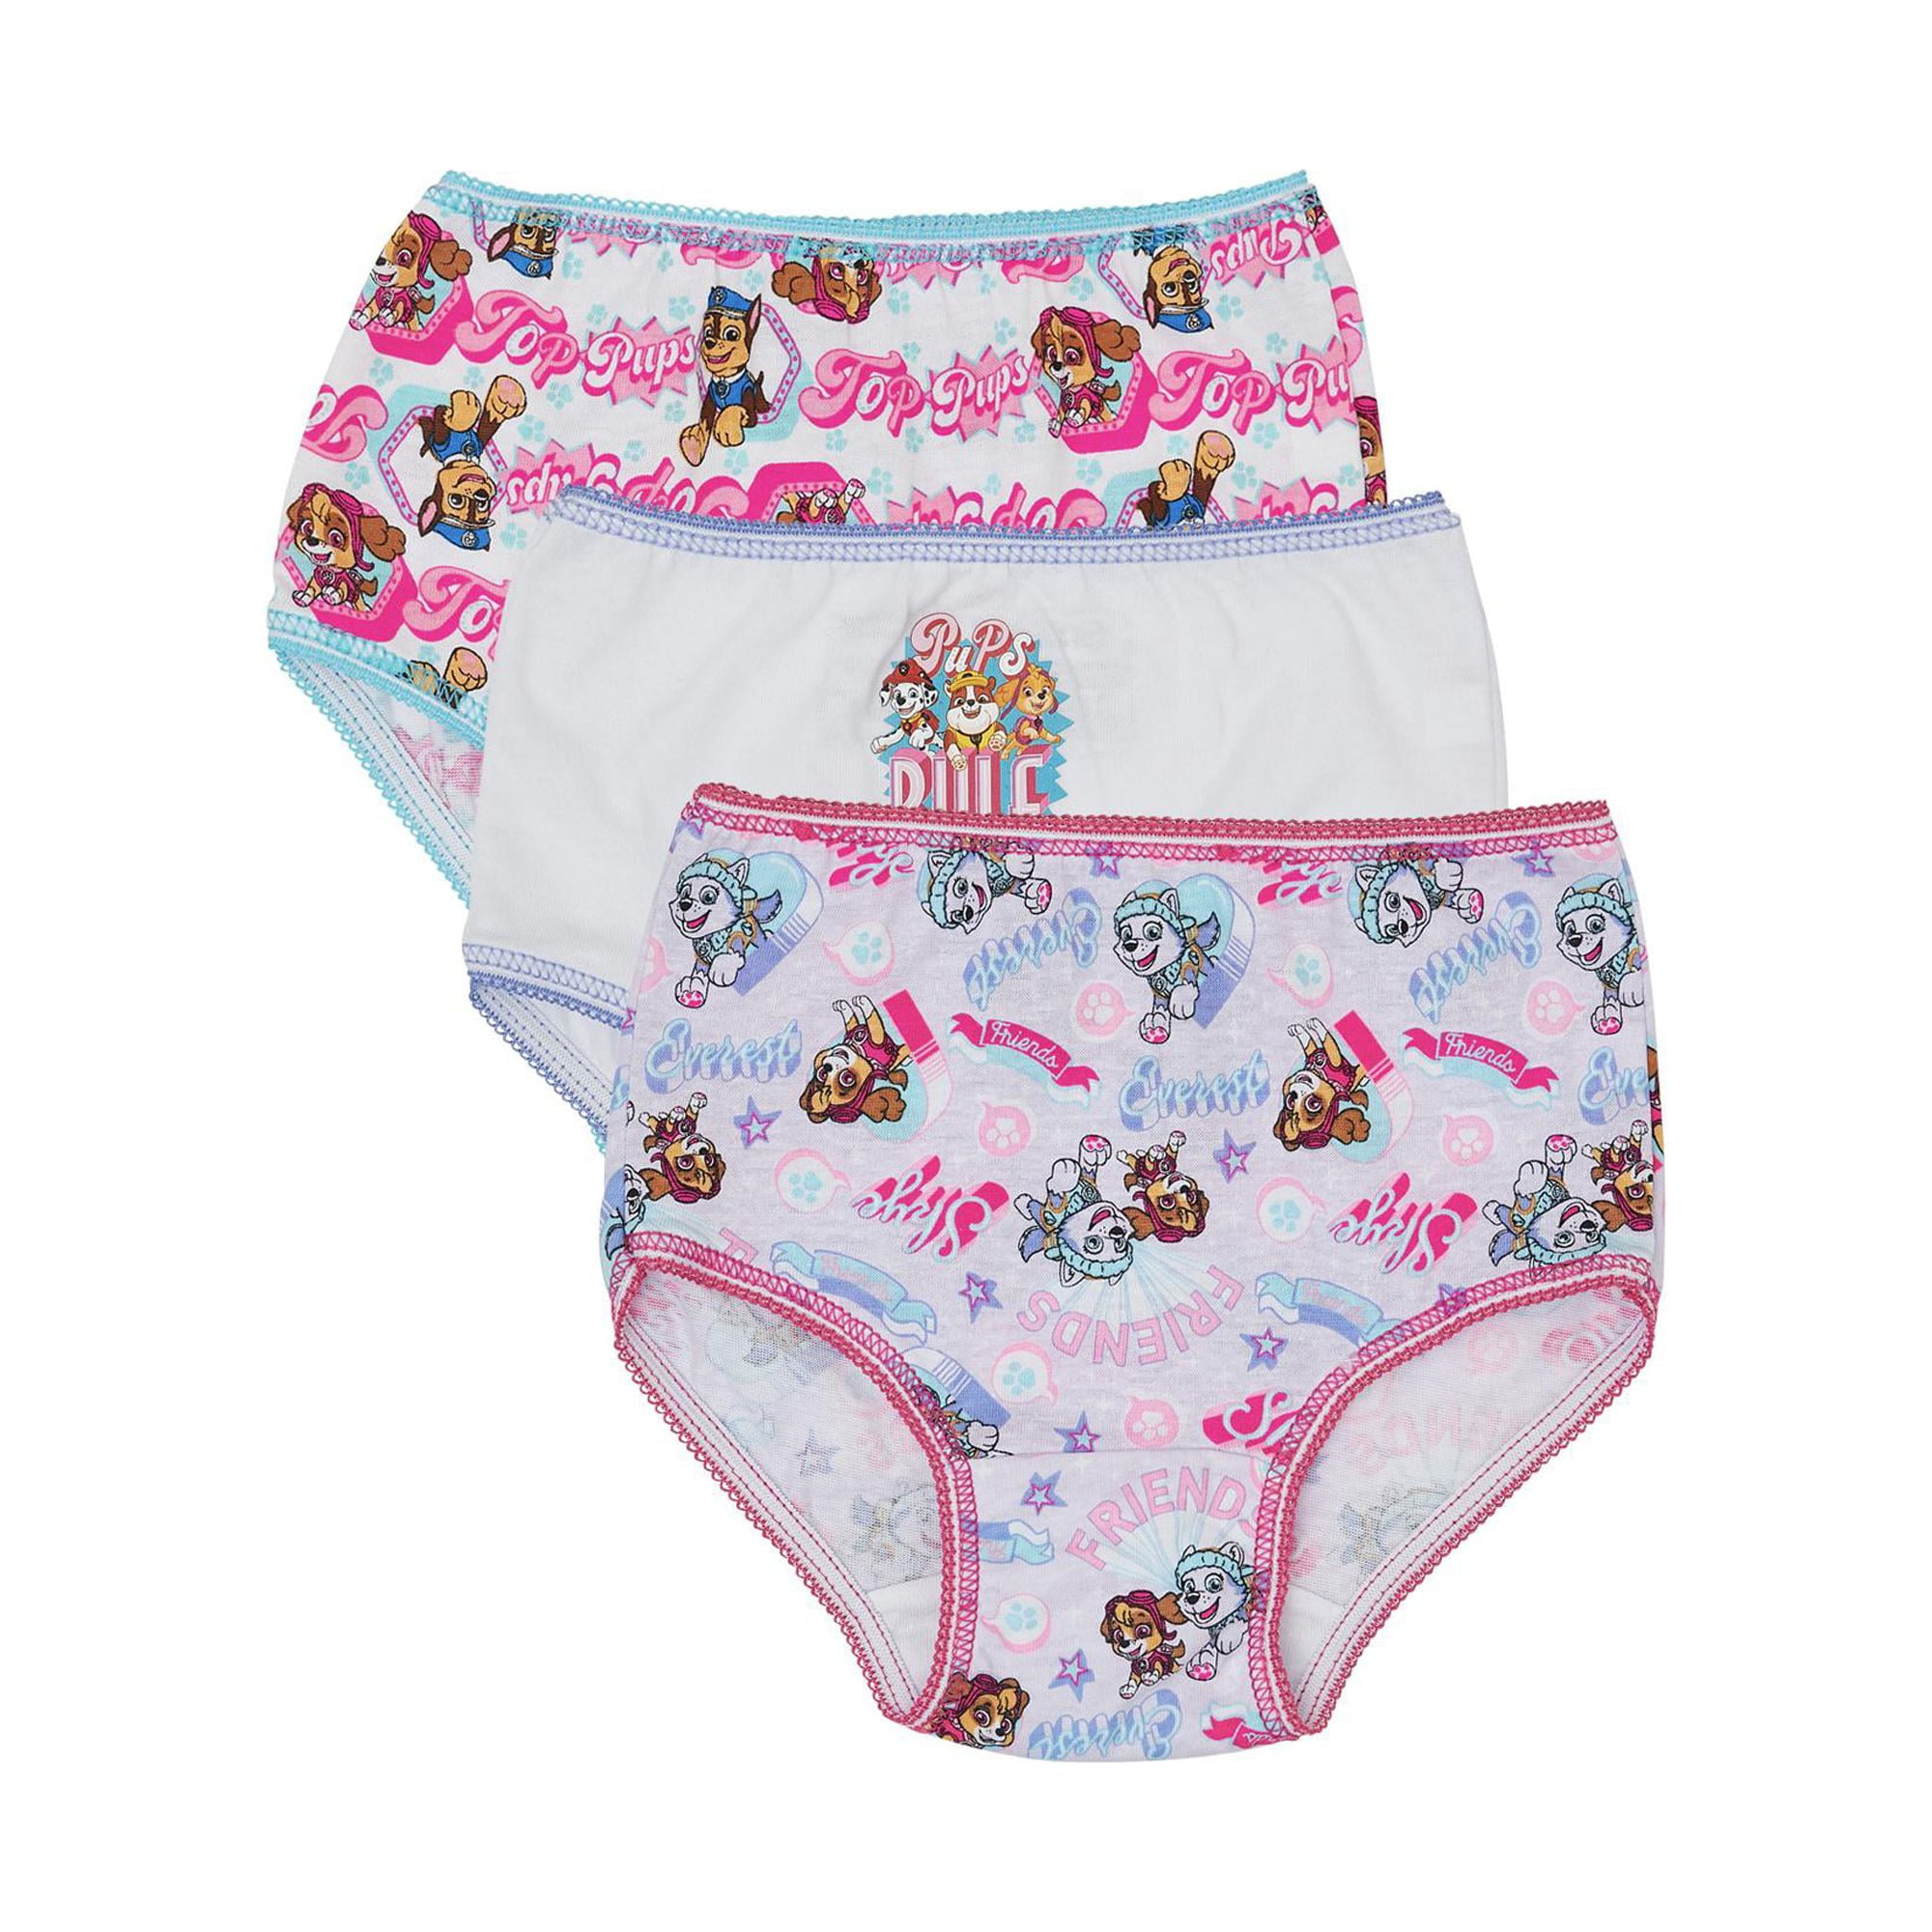 kids knickers, kids knickers Suppliers and Manufacturers at